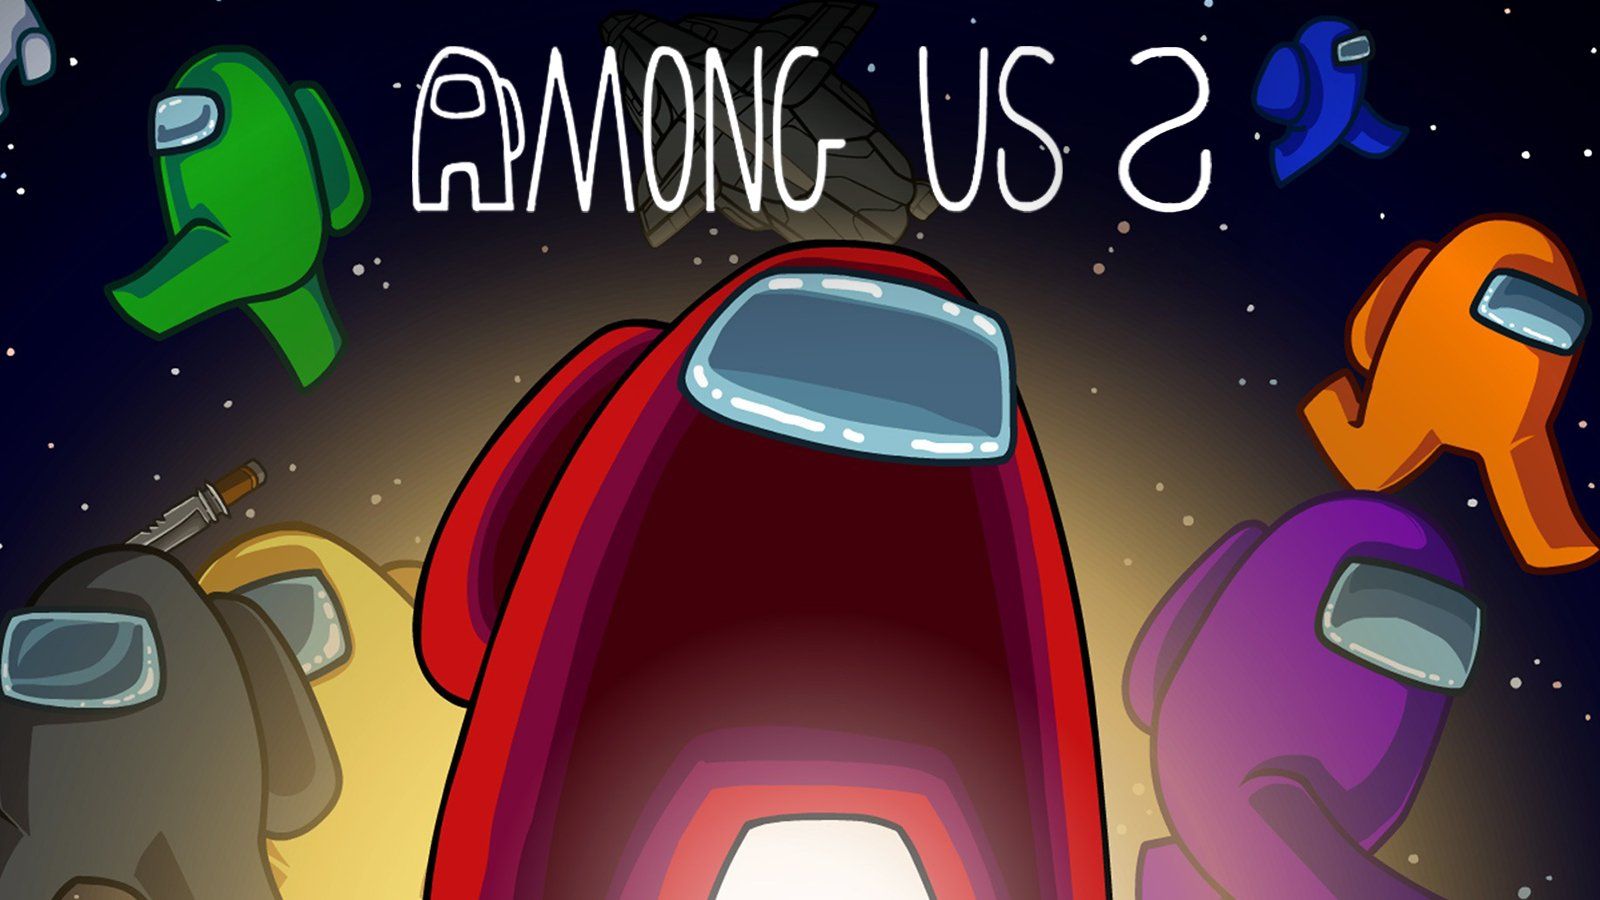 Among Us 2 announced: release date, sequel features, price, more